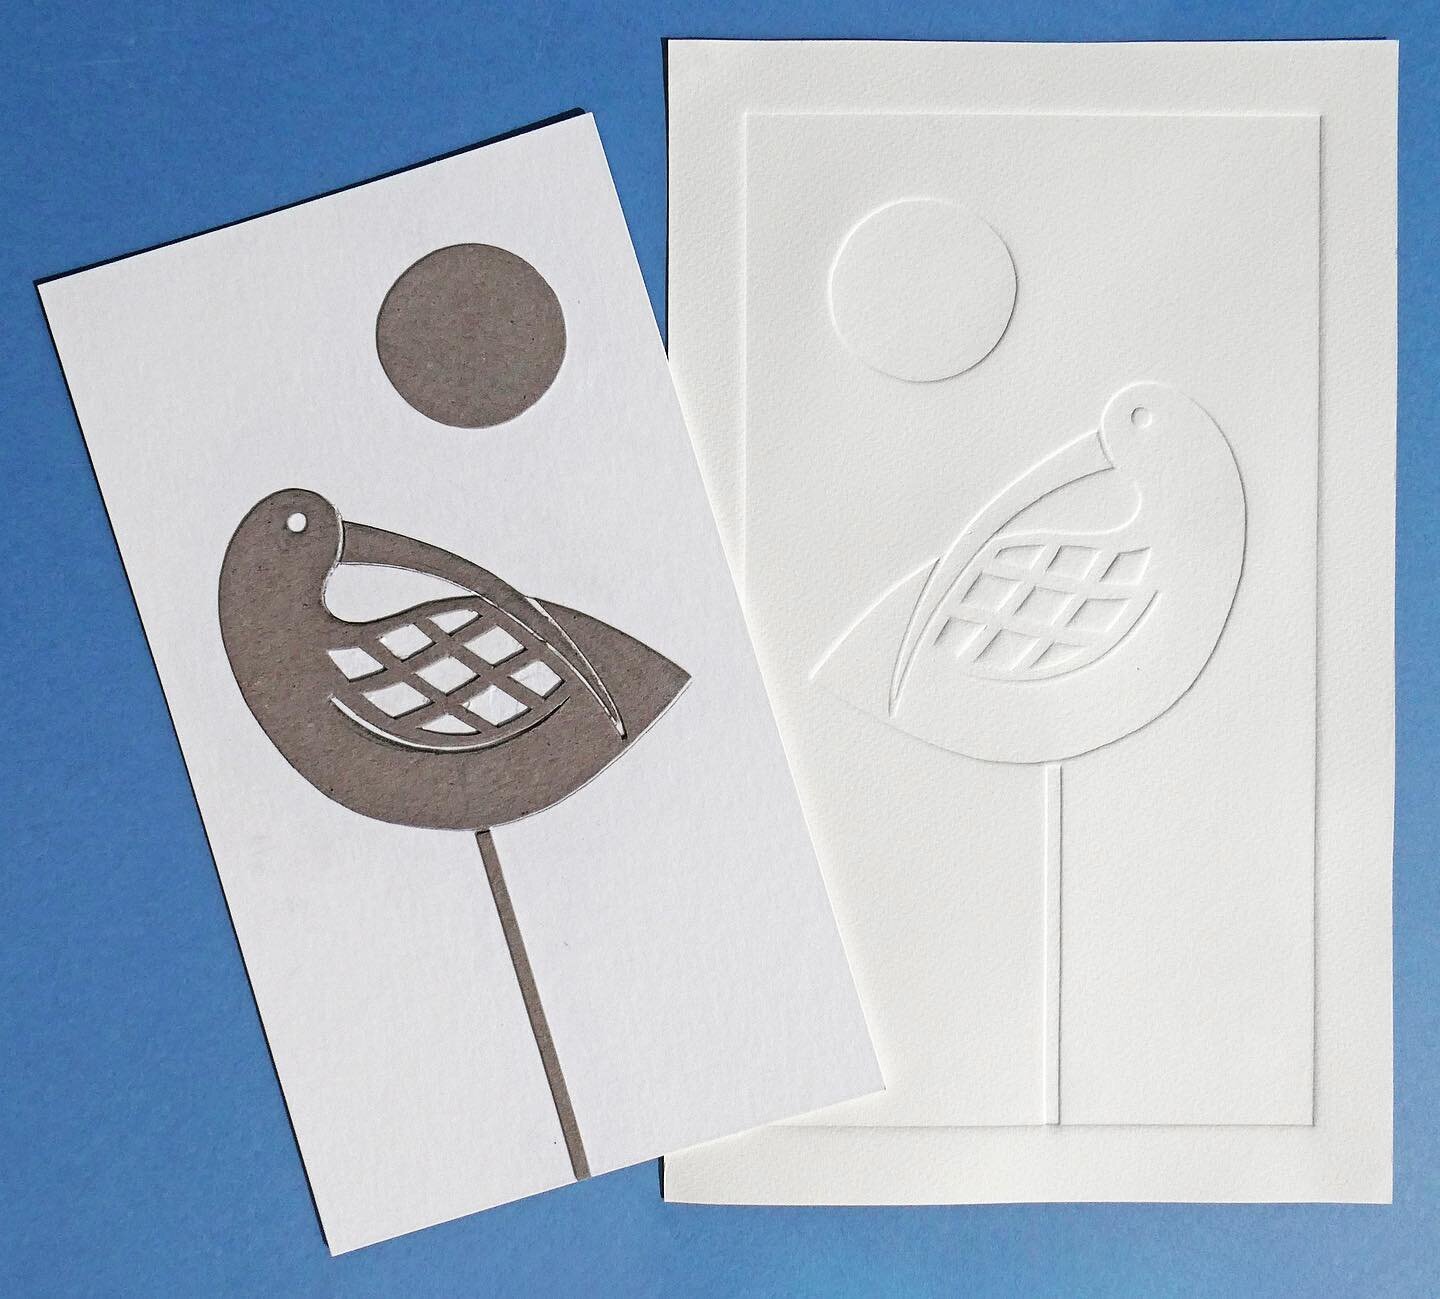 🕊️ BRITISH BIRDS EMBOSSING WORKSHOP 🕊️ 

Join me at @nwtcleycentre for an embossing workshop on the theme of British birds. The workshop will take place on Thursday 21st September from 10.30-15.30. Booking link and more info via link in bio. 🕊️

ℹ